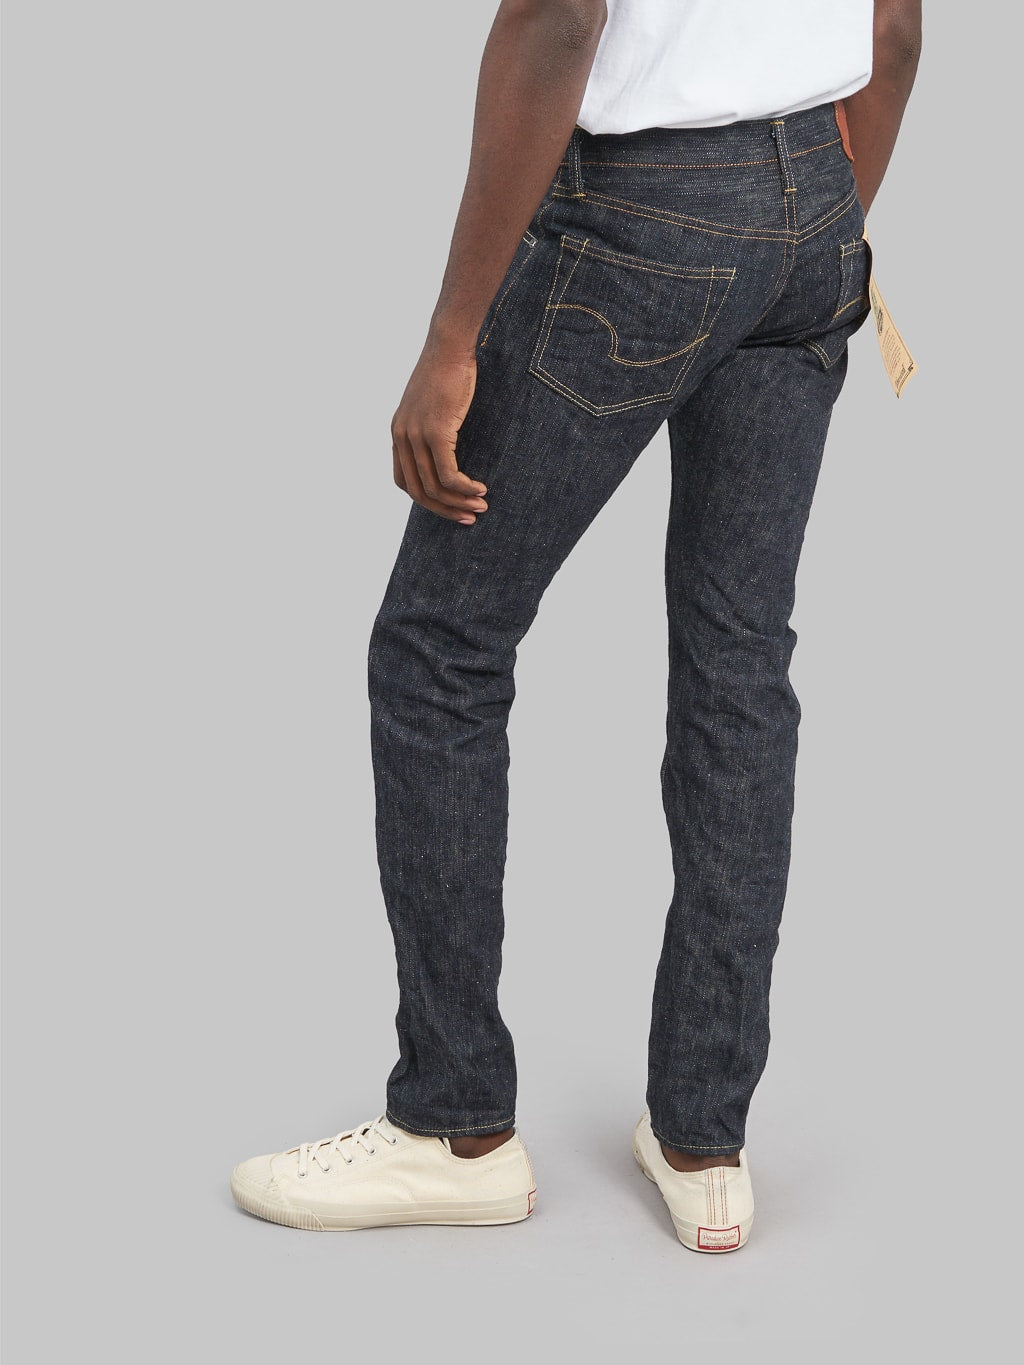 Oni denim kihannen relaxed tapered jeans back fit